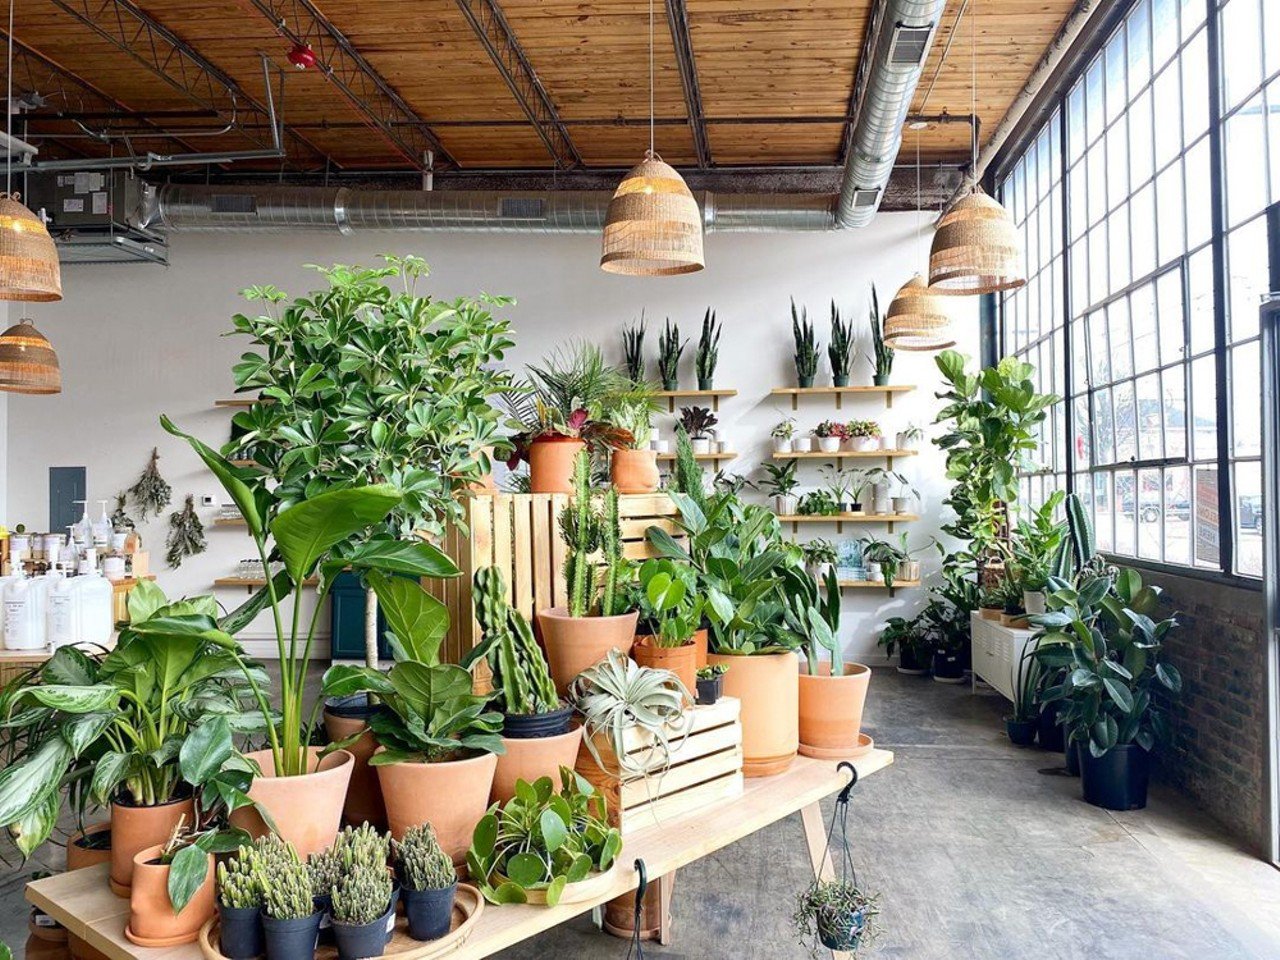 Go to a plant store 
A store like Forage or Mahonia might be the chill, peaceful spot you need to find your new favorite addition to your plant collection.
Photo via foragegreenliving/Instagram